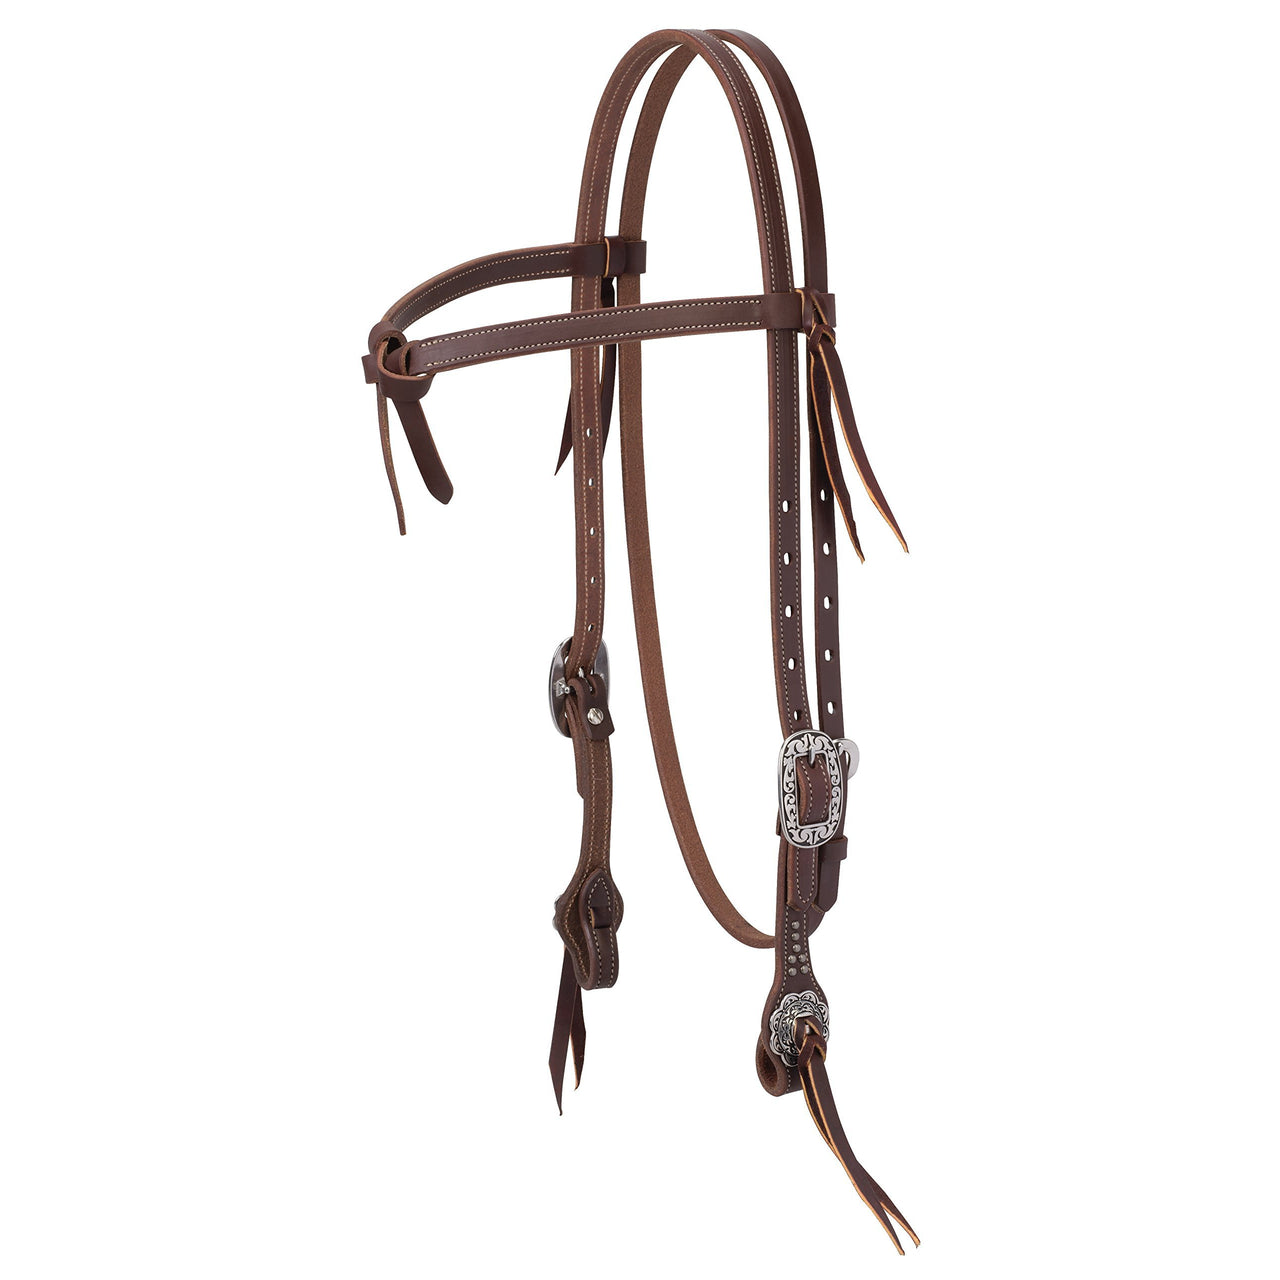 Weaver Leather Working Tack Futurity Knot Browband Headstall Average